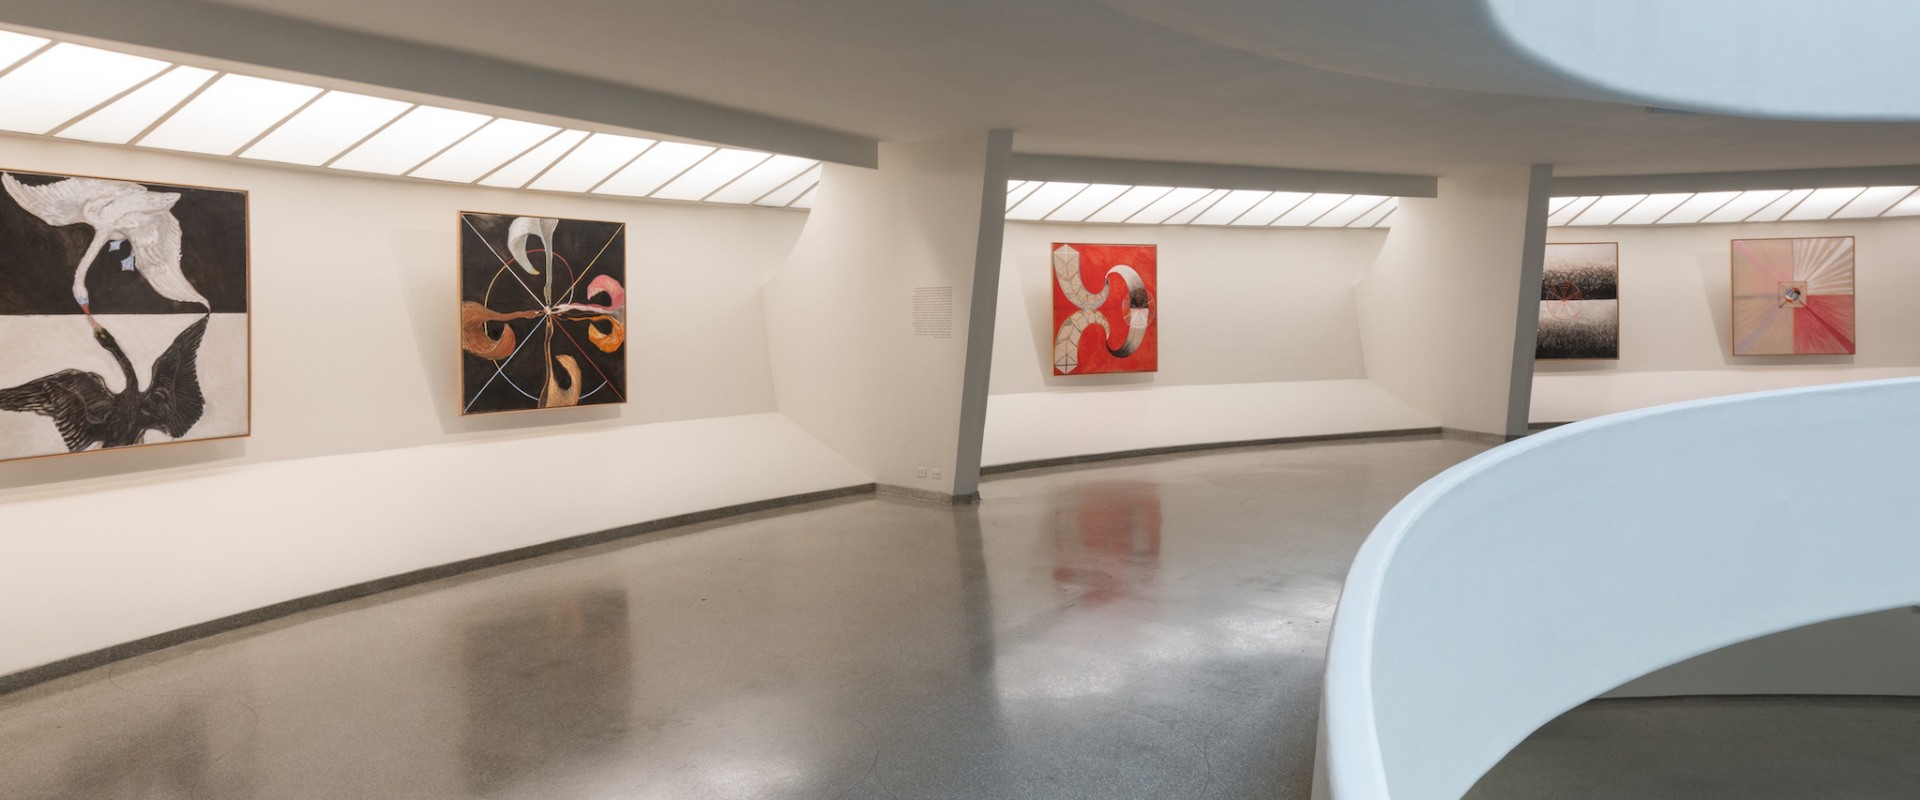 Exploring the Permanent Collections of Art Galleries in New York